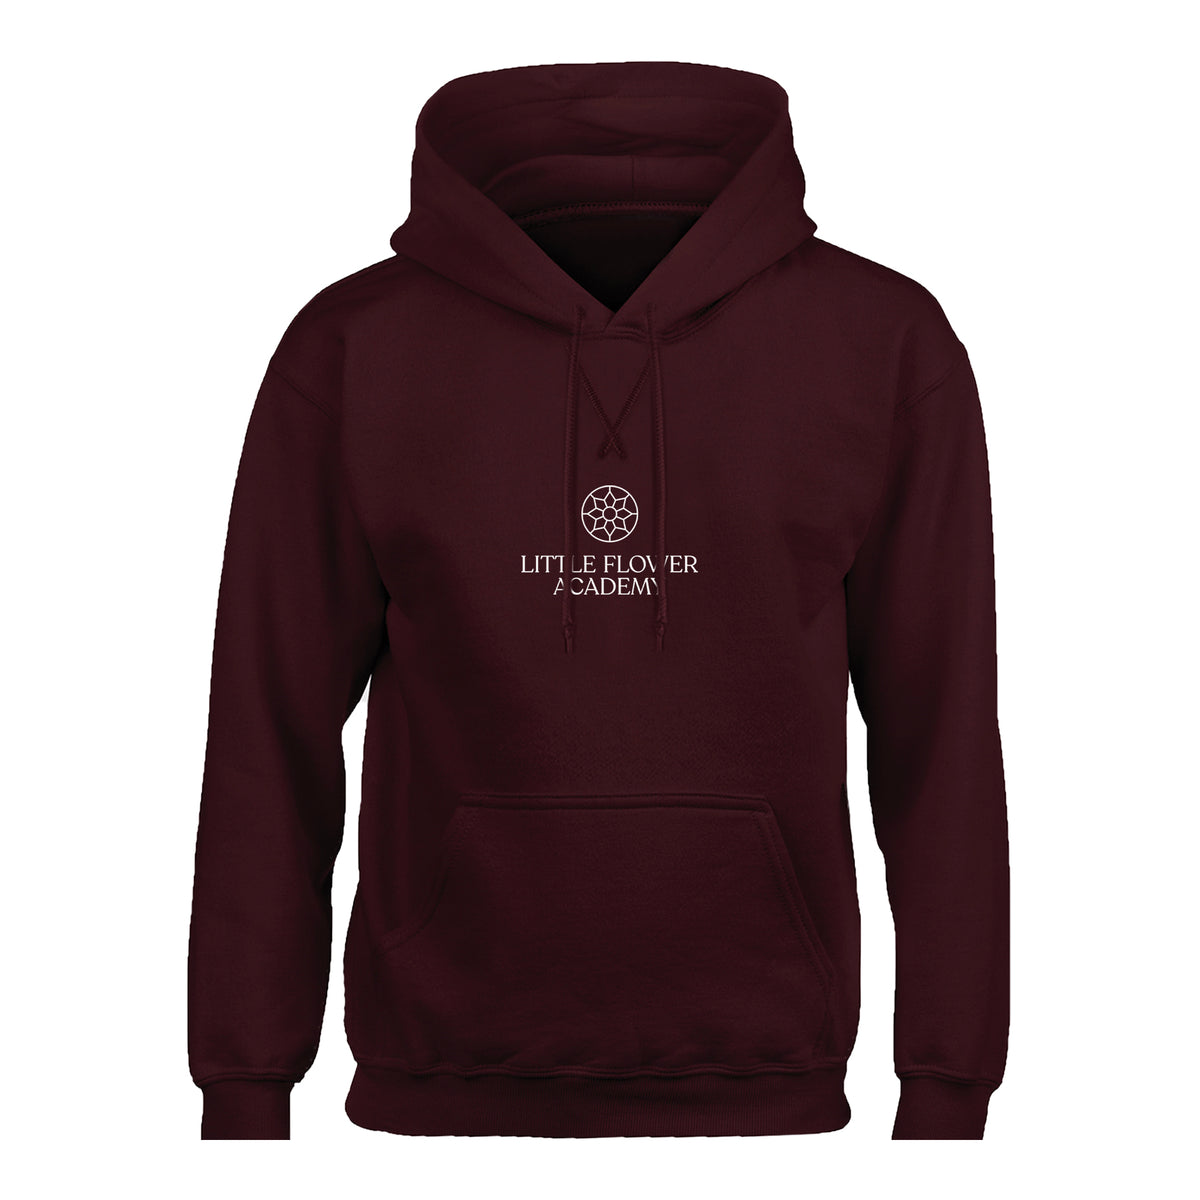 LITTLE FLOWER ACADEMY HOODIE, YOUTH